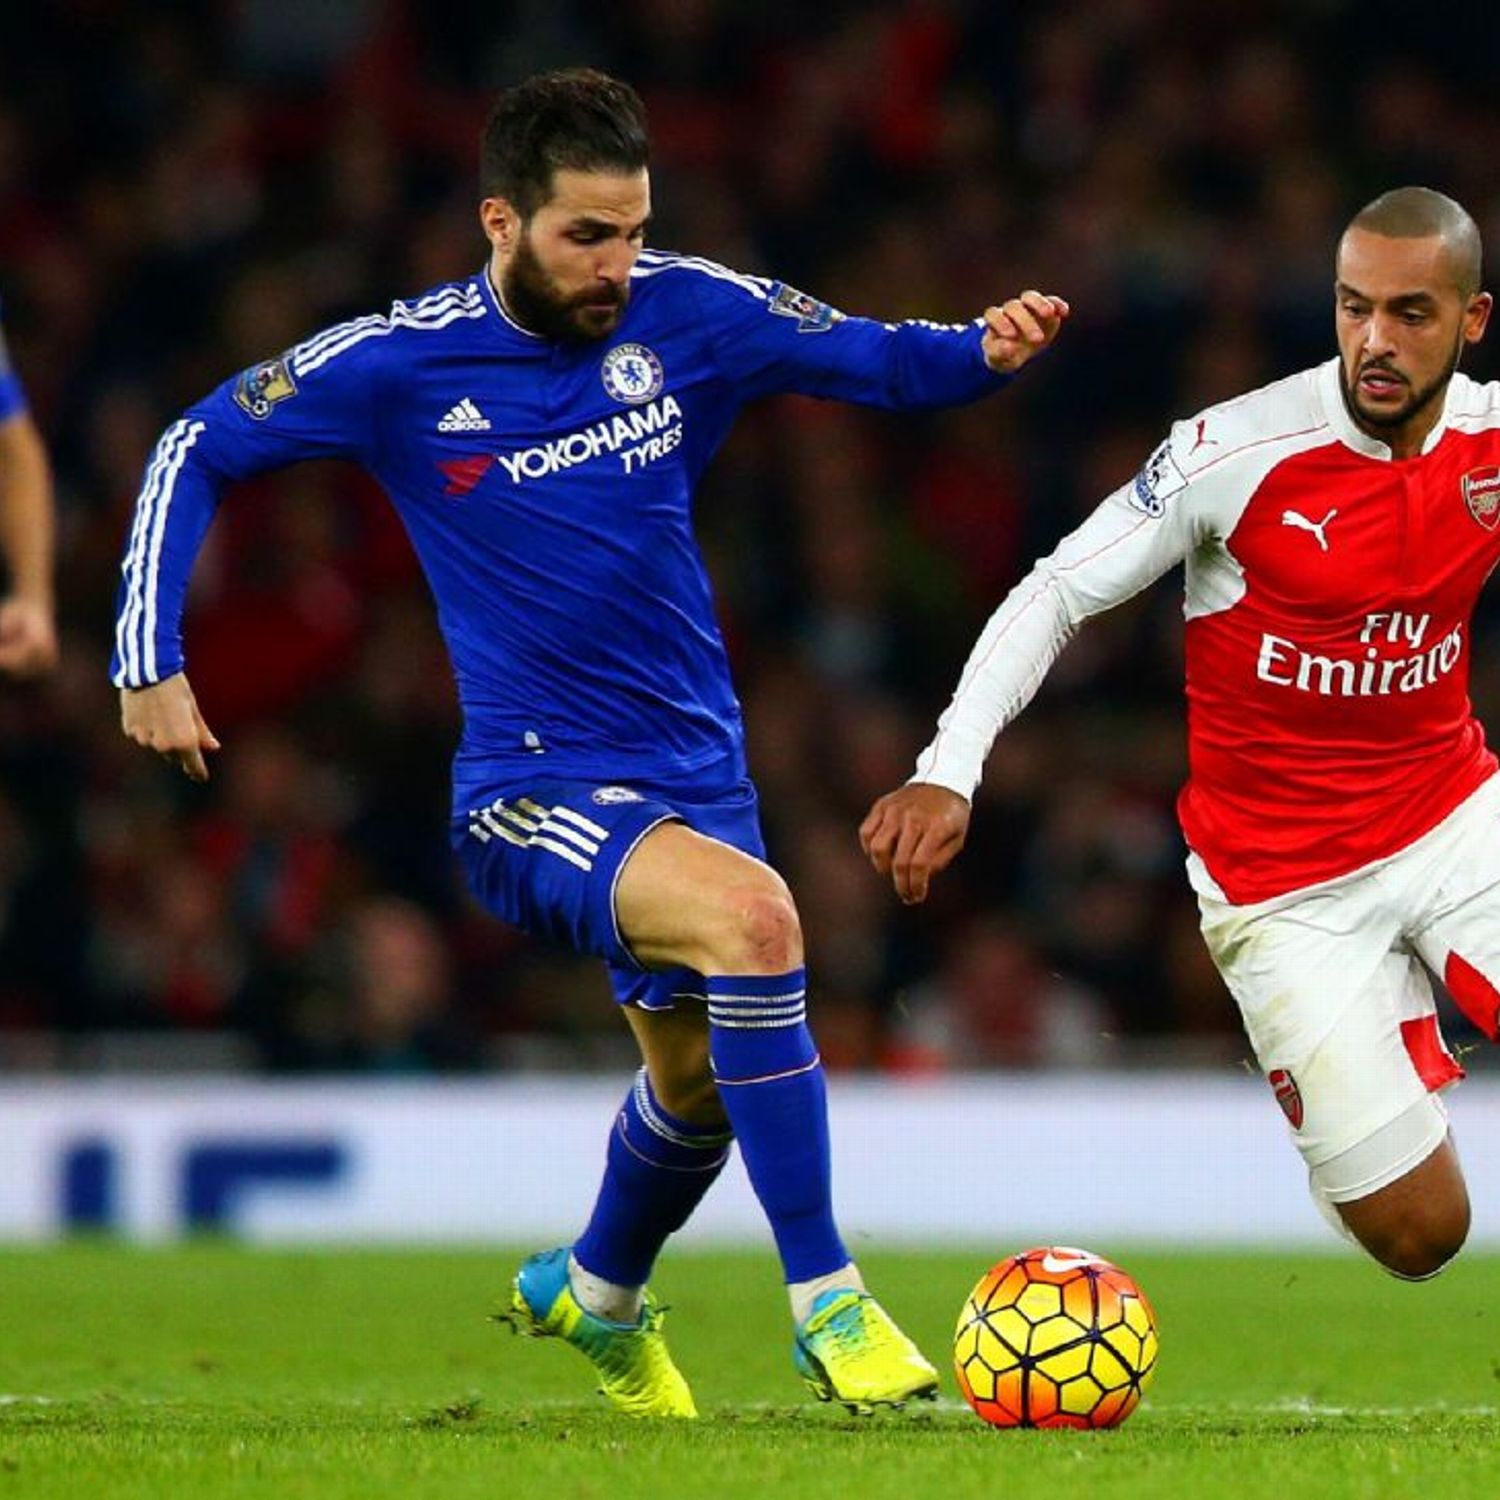 Arsenal and Chelsea have the chance to show their true Premier League colours